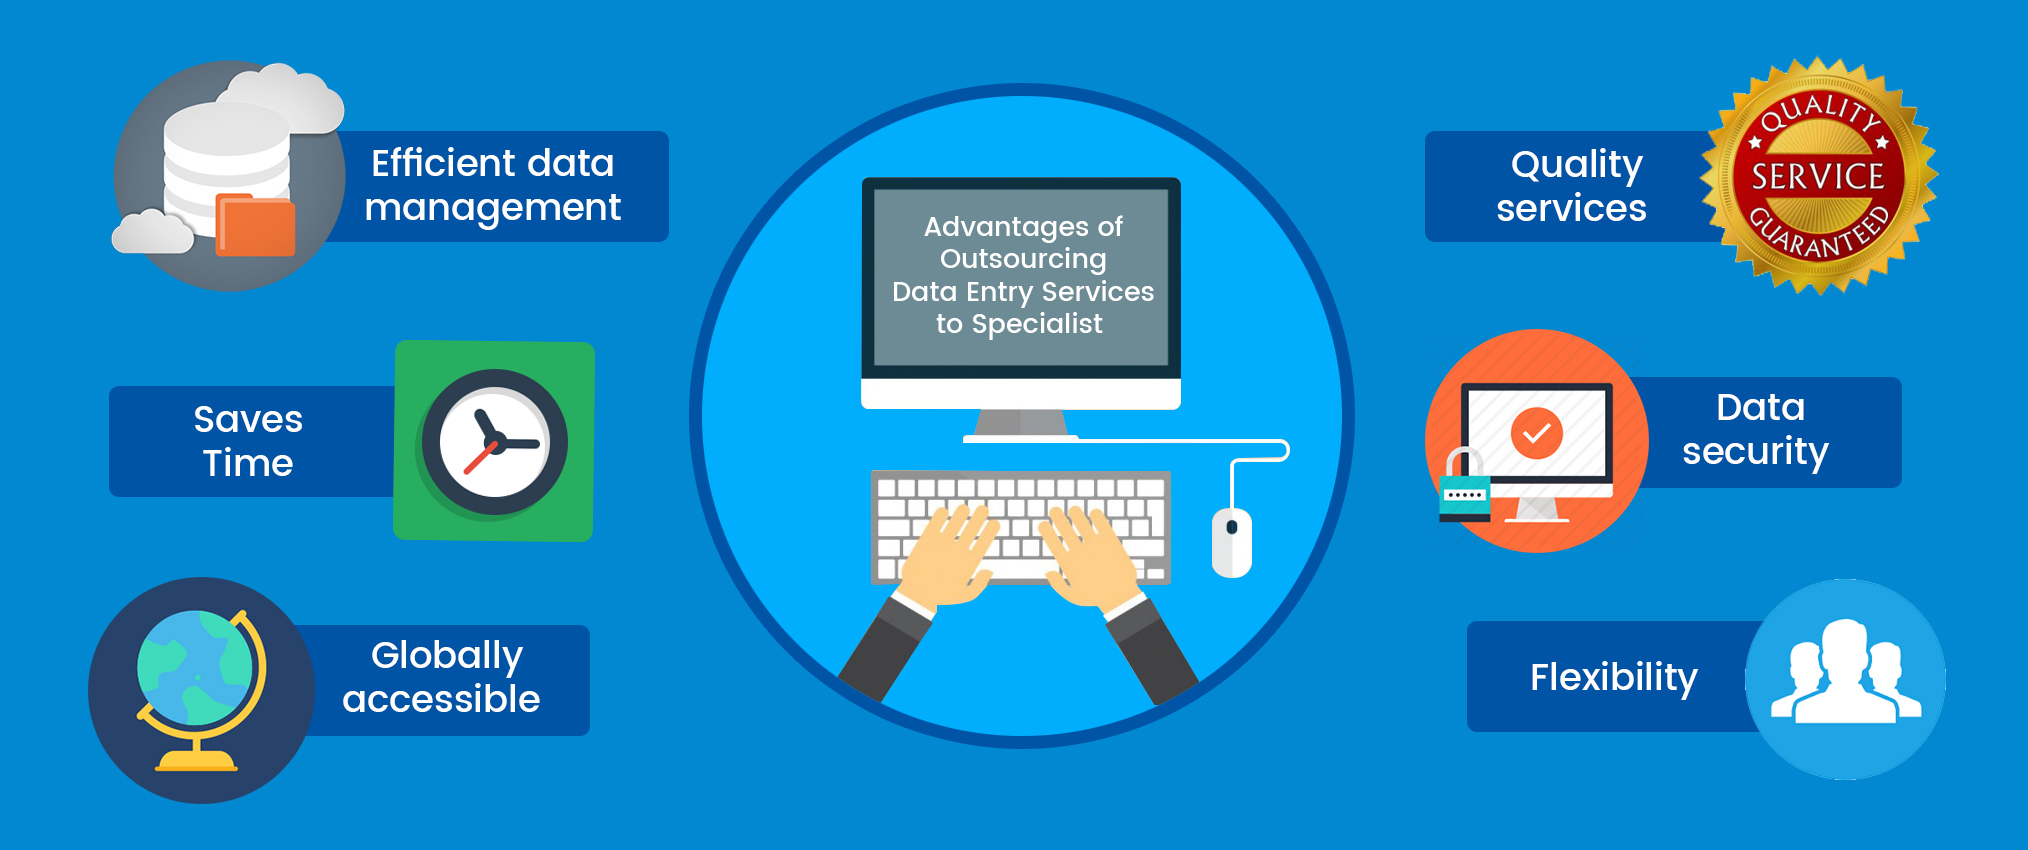 Advantages of Outsourcing Data Entry Services to Specialist